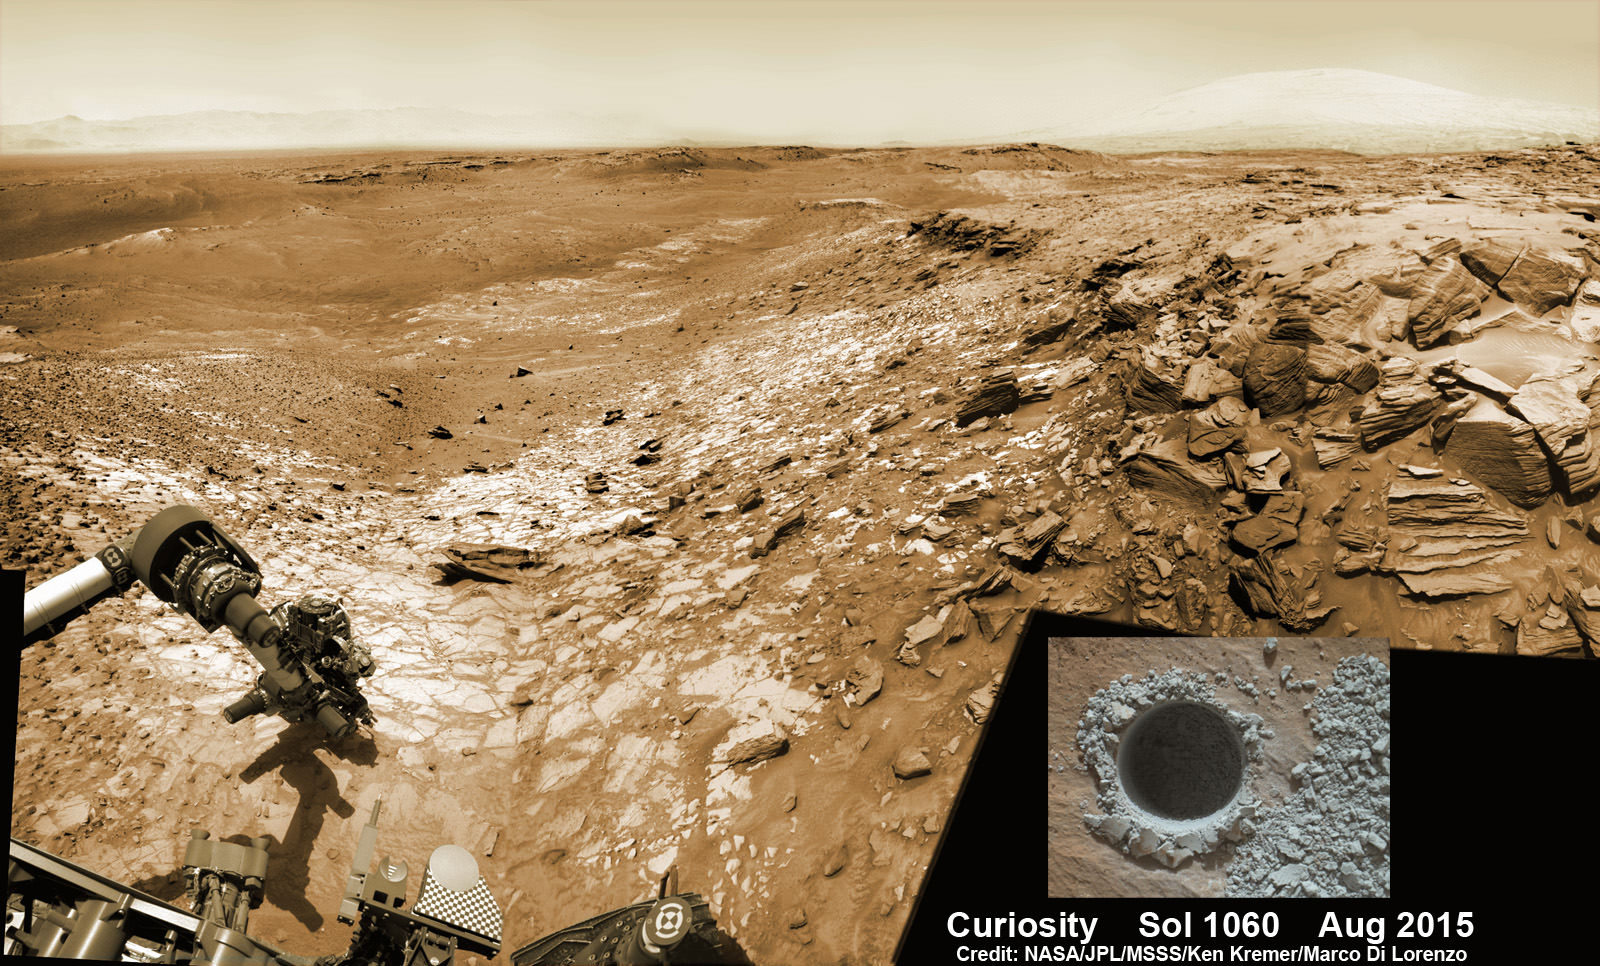 Curiosity extends robotic arm and conducts sample drilling at “Buckskin” rock target at bright toned “Lion” outcrop at the base of Mount Sharp on Mars, seen at right.   Gale Crater eroded rim seen in the distant background at left, in this composite multisol mosaic of navcam raw images taken to Sol 1059, July 30, 2015.  Navcam camera raw images stitched and colorized. Inset: MAHLI color camera up close image of full depth drill hole at “Buckskin” rock target on Sol 1060.  Credit:  NASA/JPL-Caltech/MSSS/Ken Kremer/kenkremer.com/Marco Di Lorenzo   